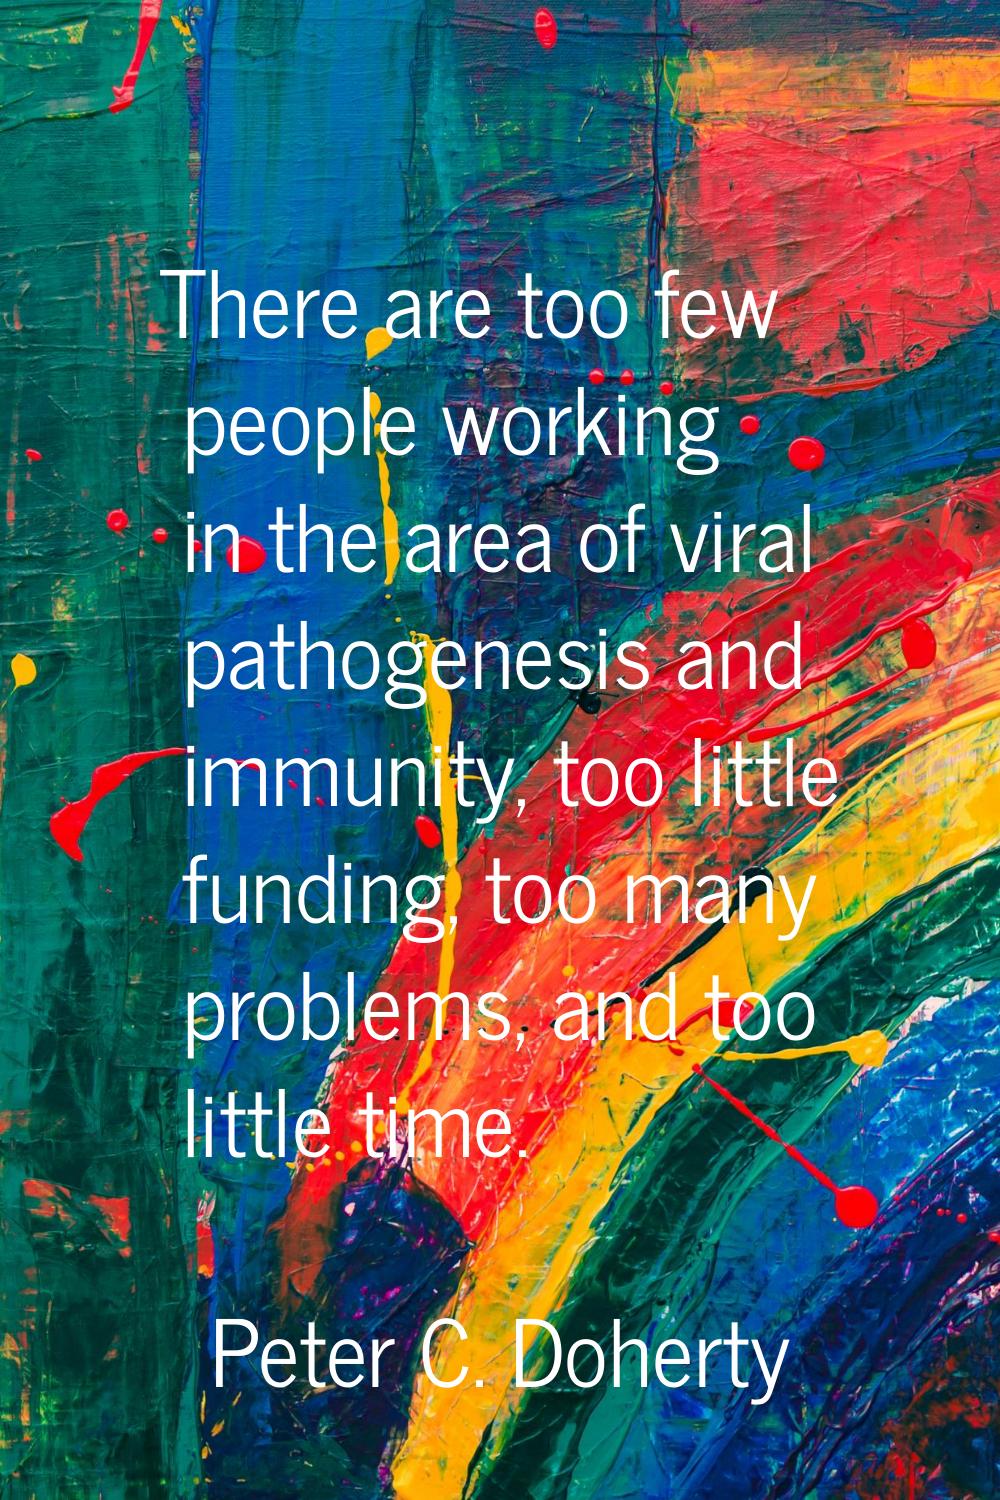 There are too few people working in the area of viral pathogenesis and immunity, too little funding